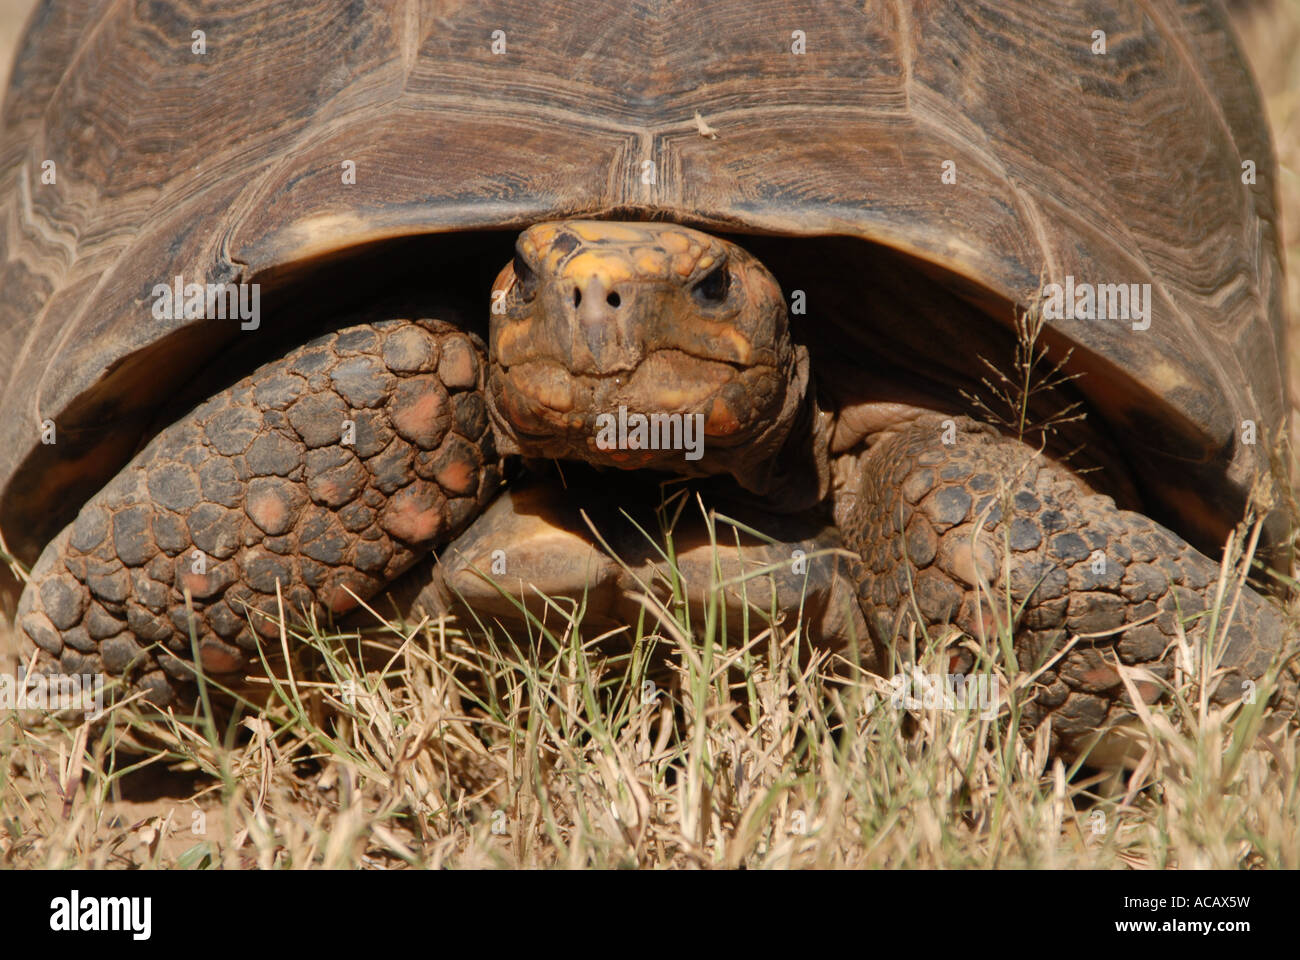 Red-footed tortoise (Geochelone carbonaria), Gran Chaco, Paraguay Stock Photo